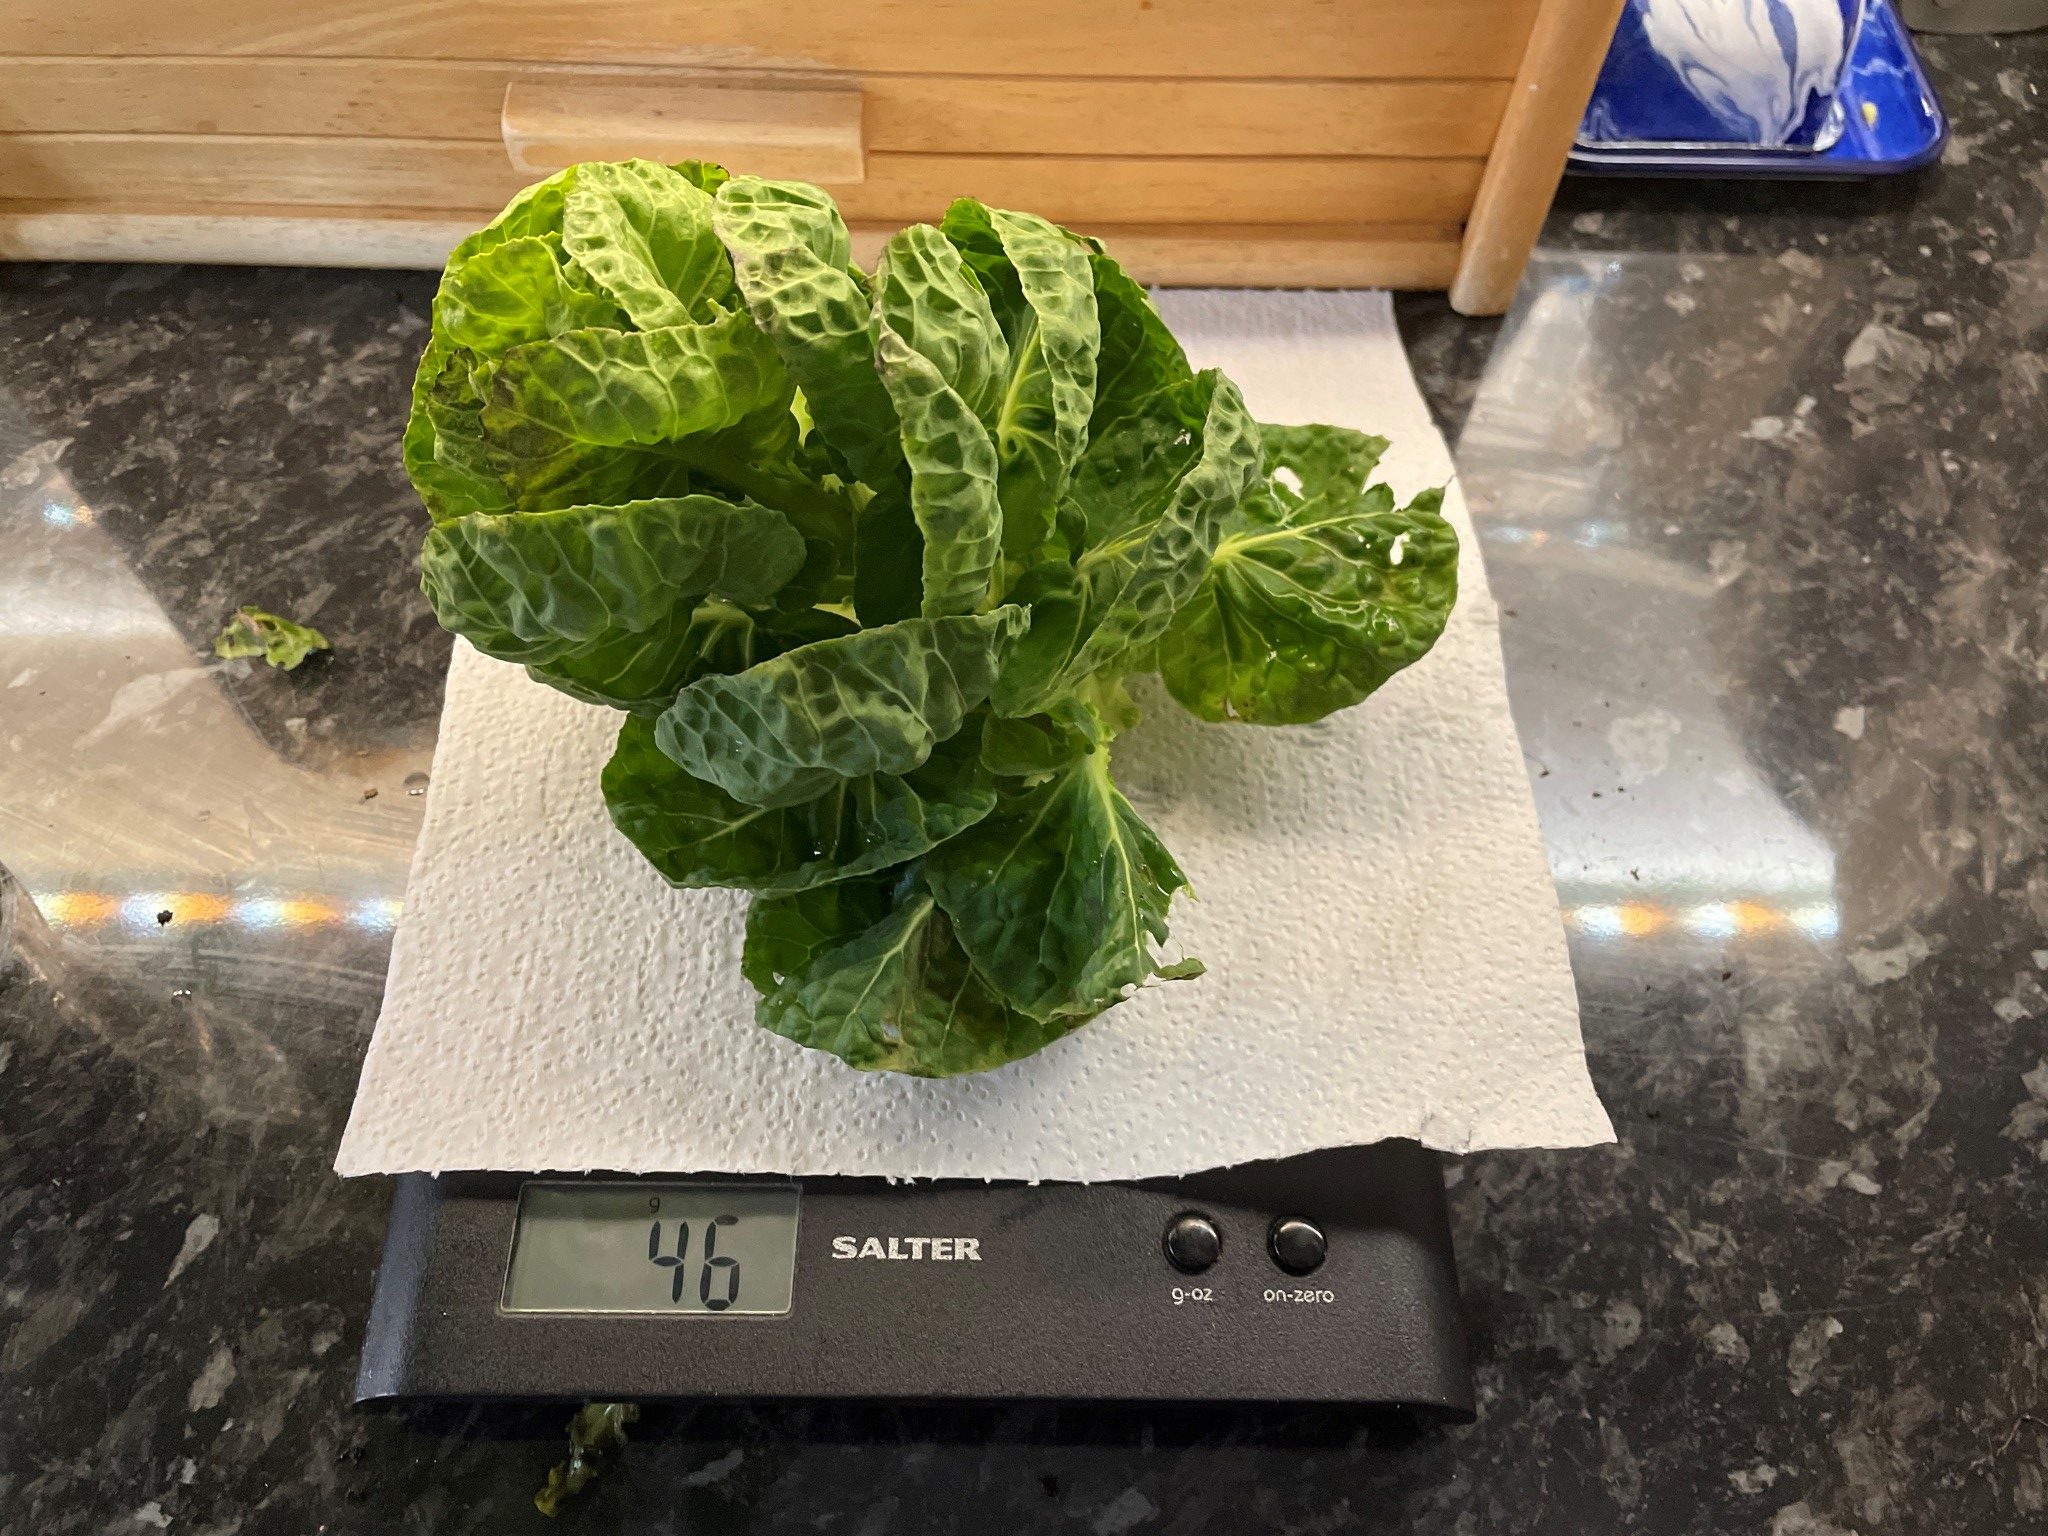 Brussel sprout "crown of leaves" harvested 5/2/22